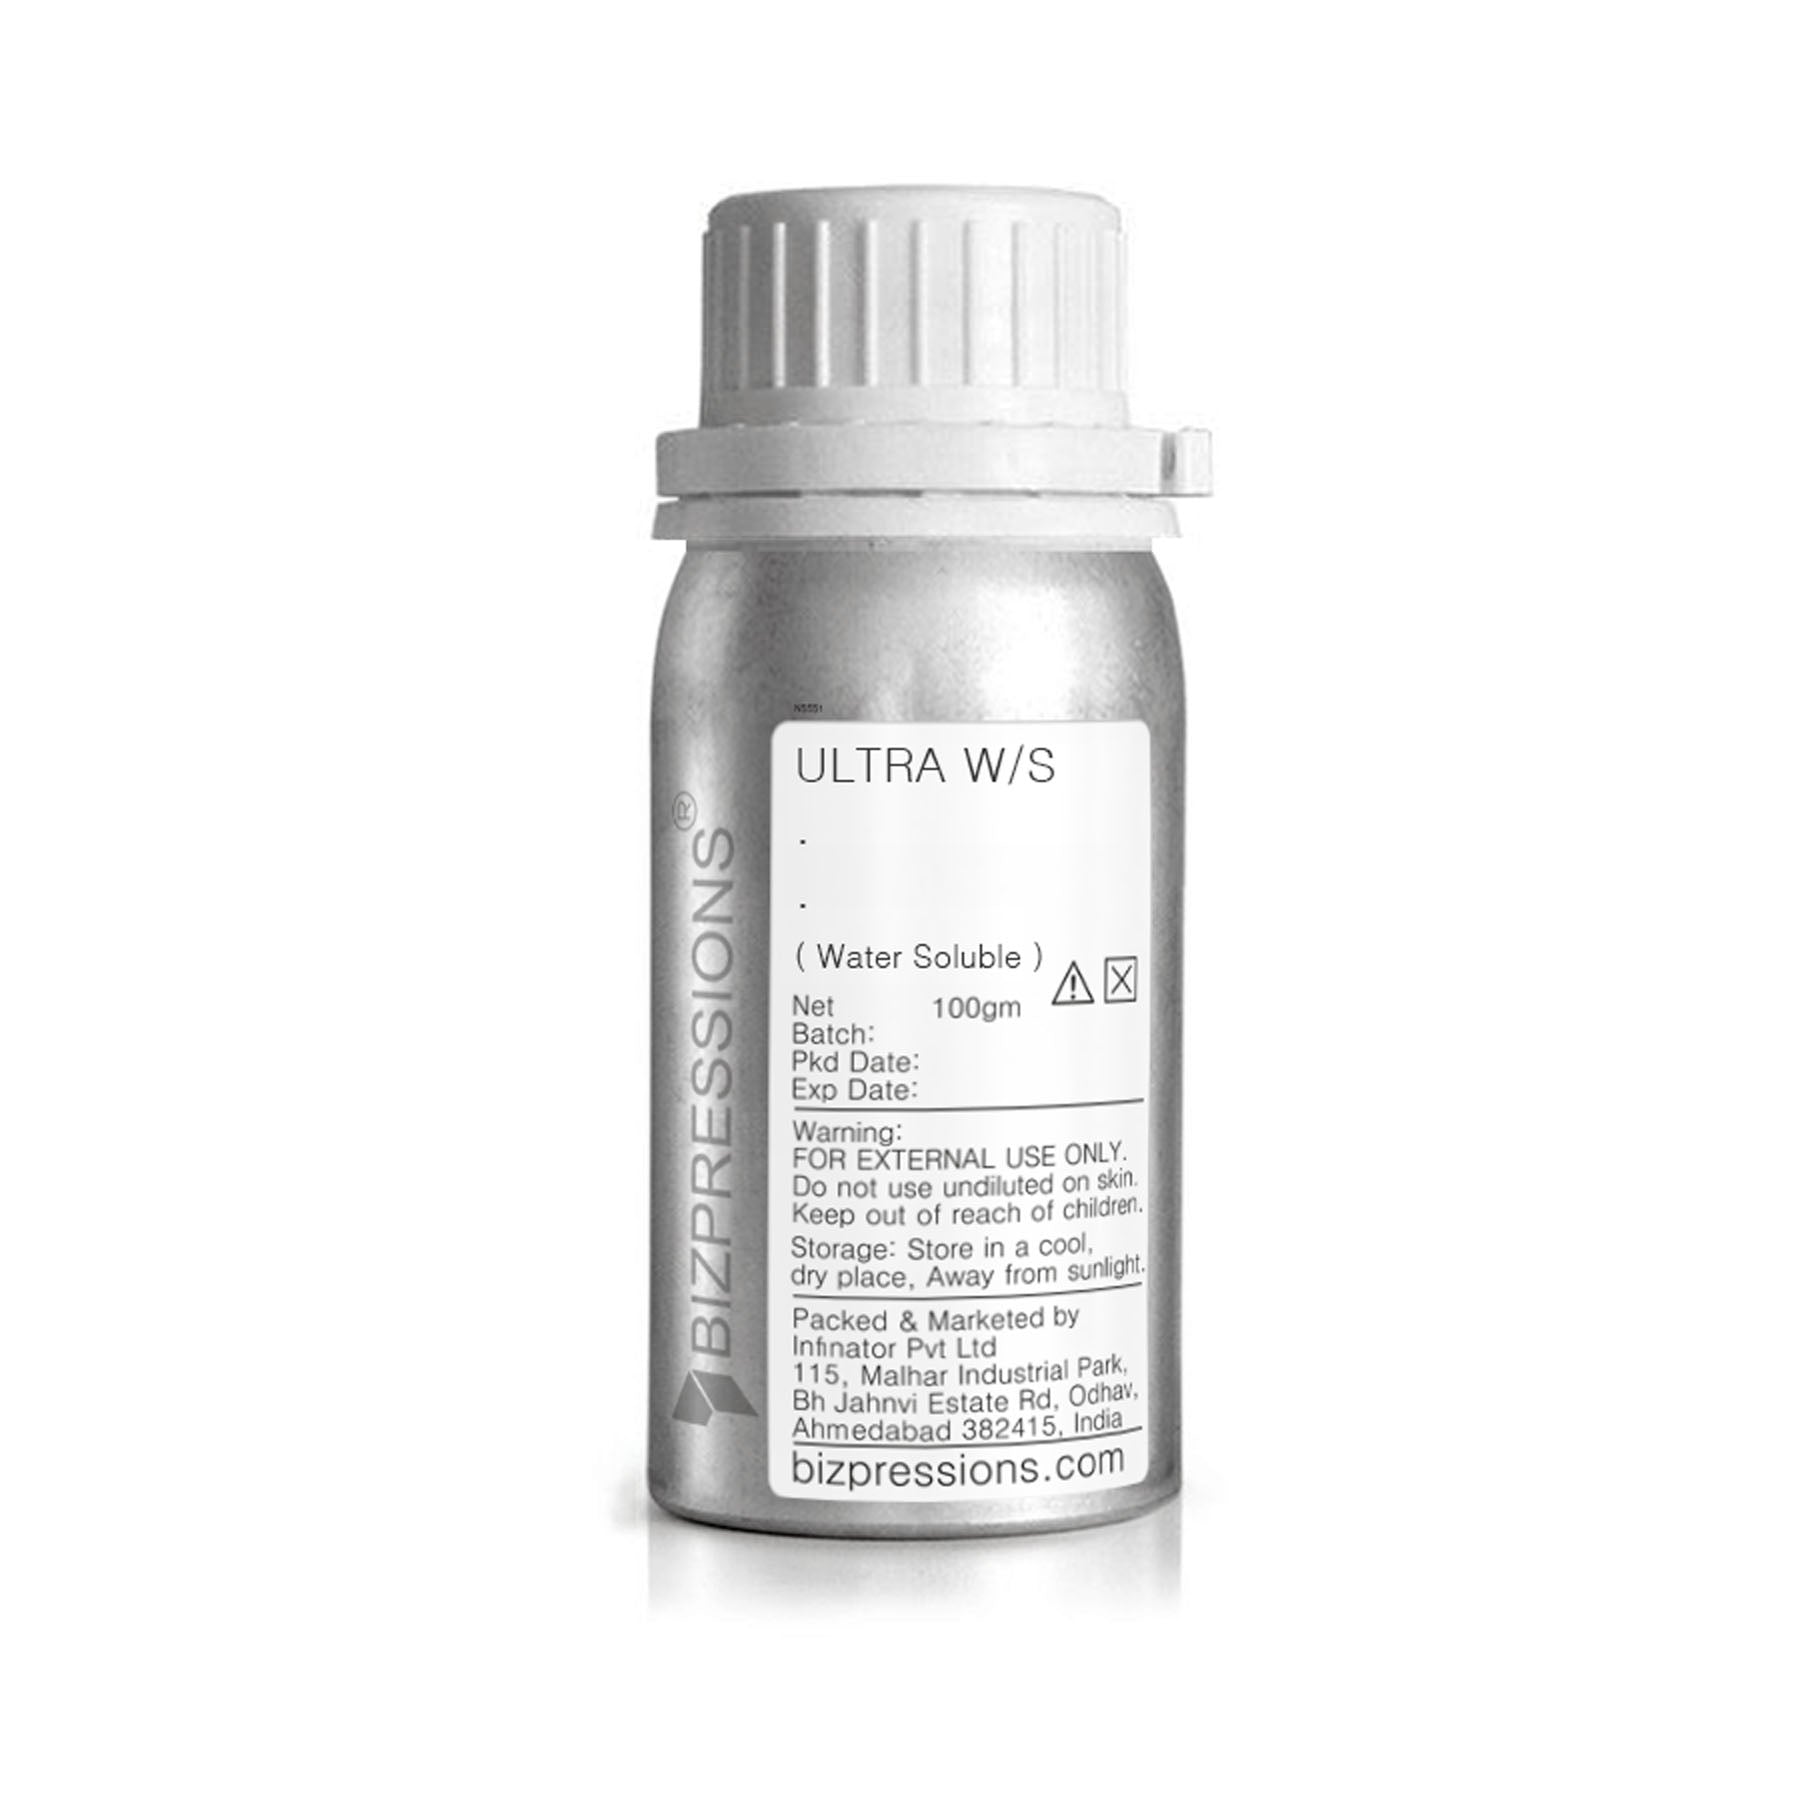 ULTRA W/S - Fragrance ( Water Soluble ) - 100 gm